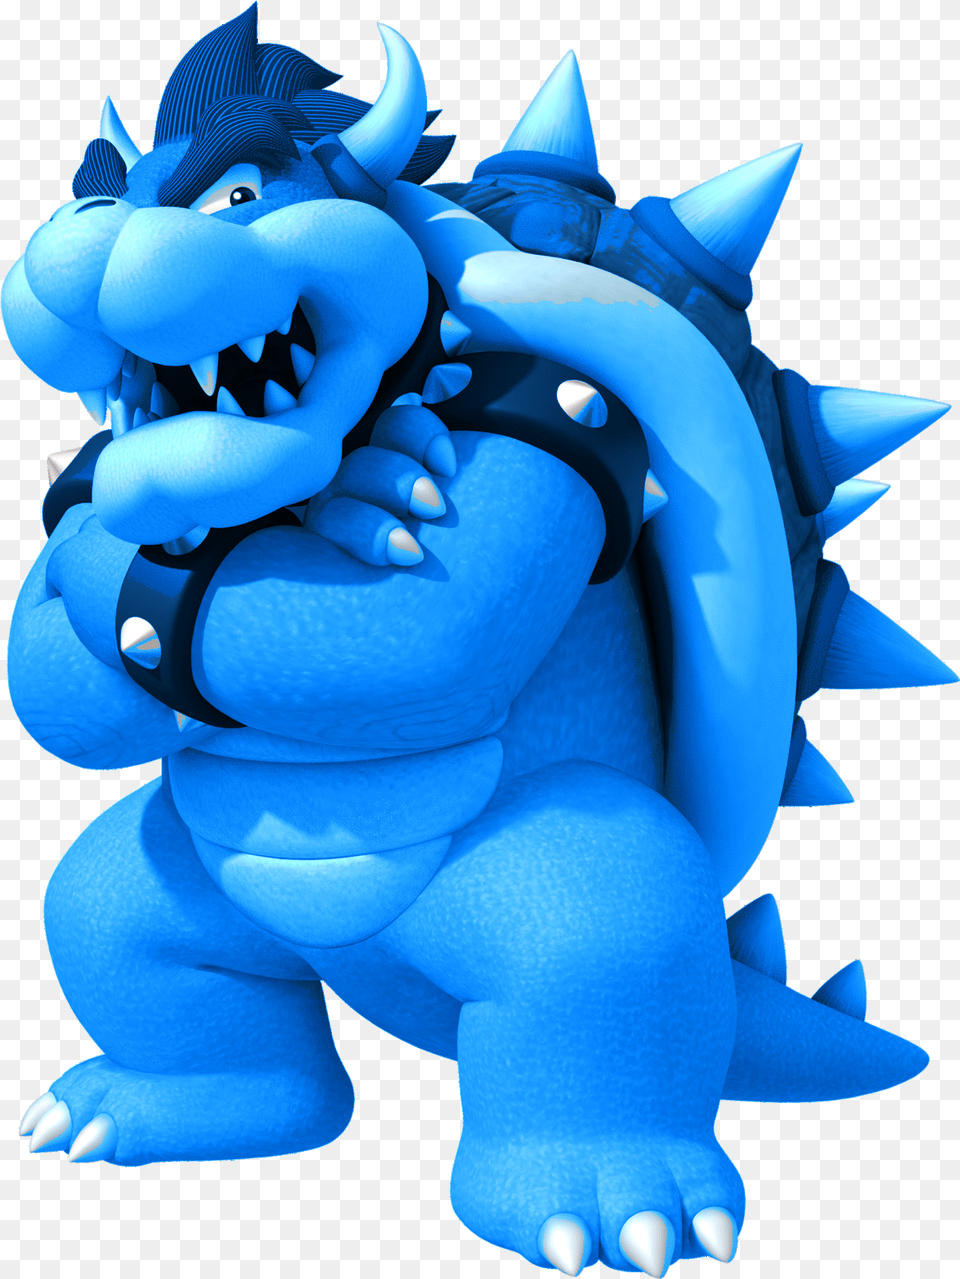 King Koopa From Mario Download Bowser From Mario, Accessories, Animal, Dinosaur, Reptile Free Png